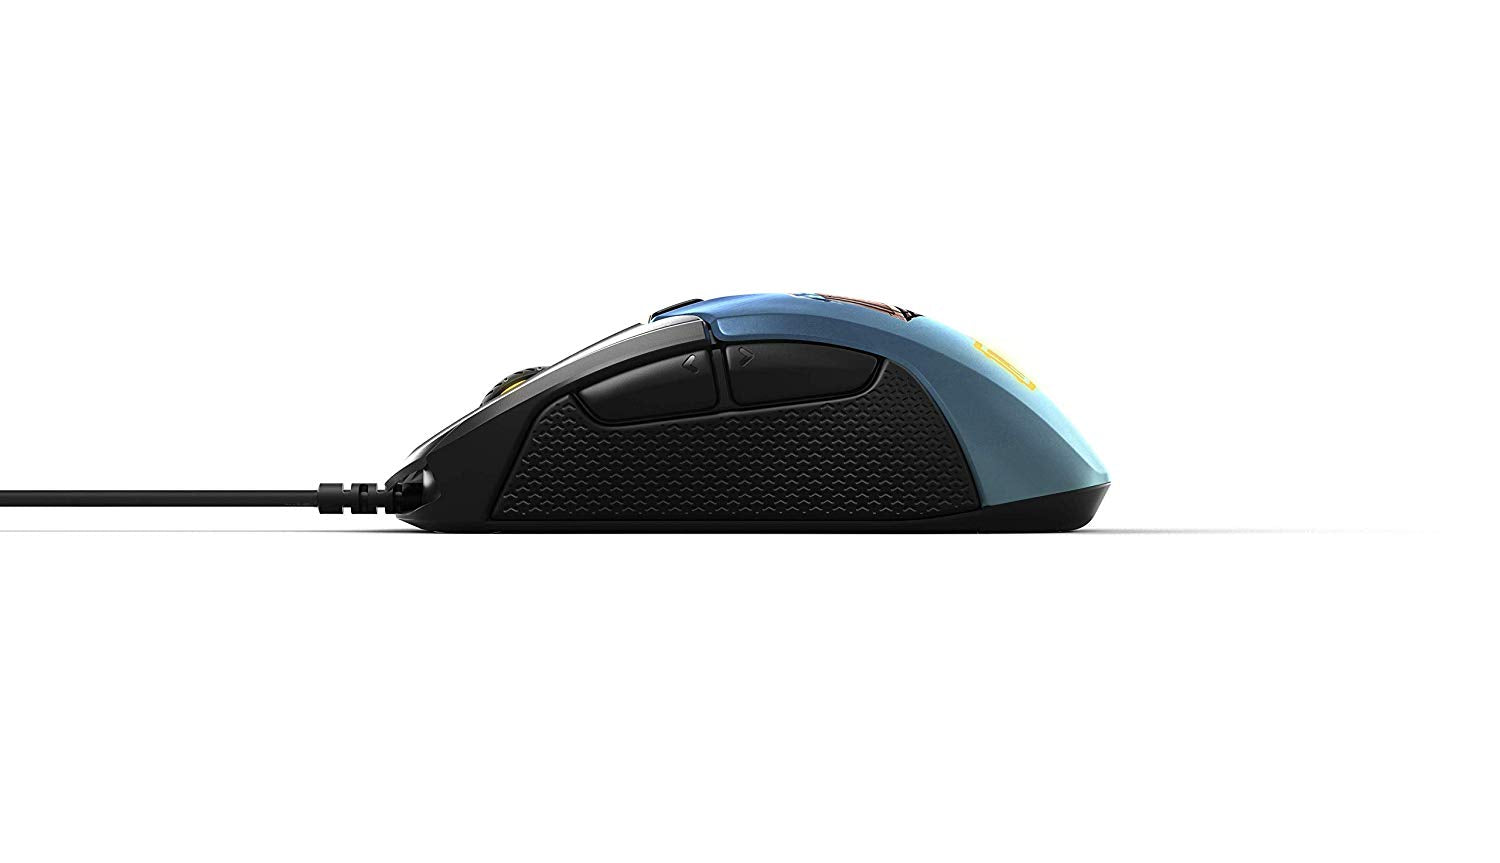 MOUSE STEELSERIES GAMING RIVAL 310 PUBG 12000Dpi